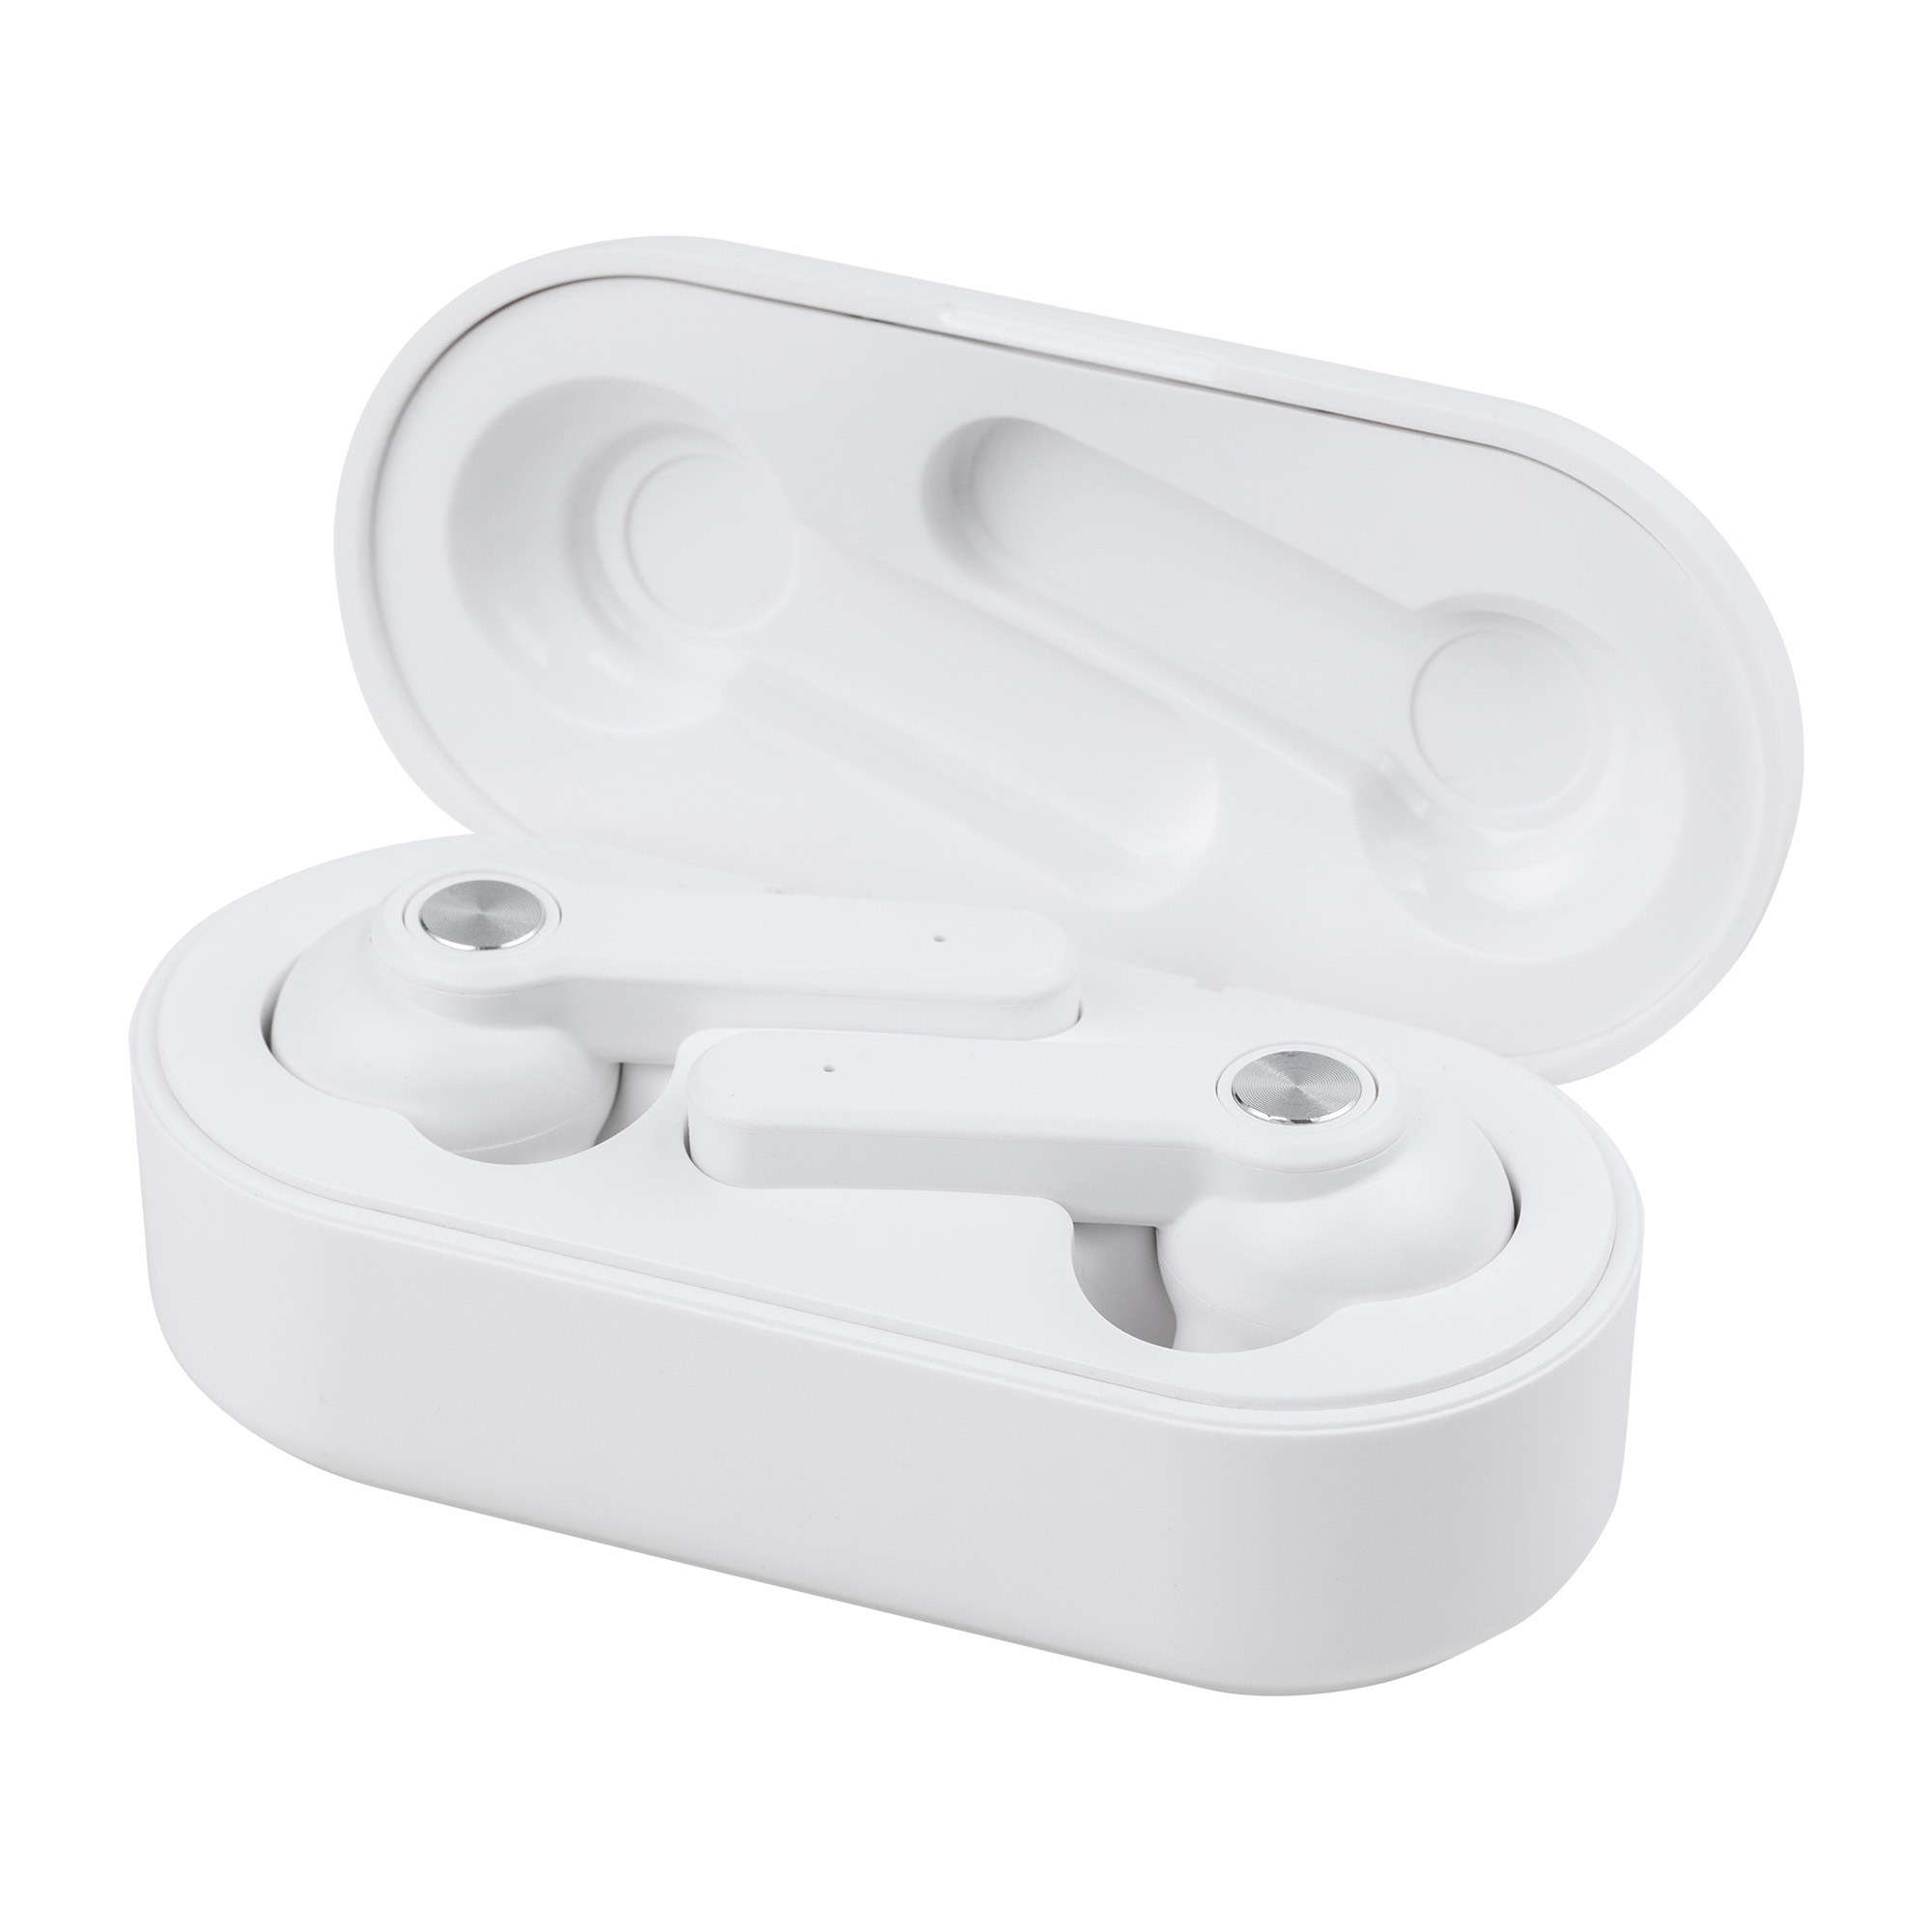 Kingstar Tws Earbuds with charging case twins bluetooth stereo earbuds 